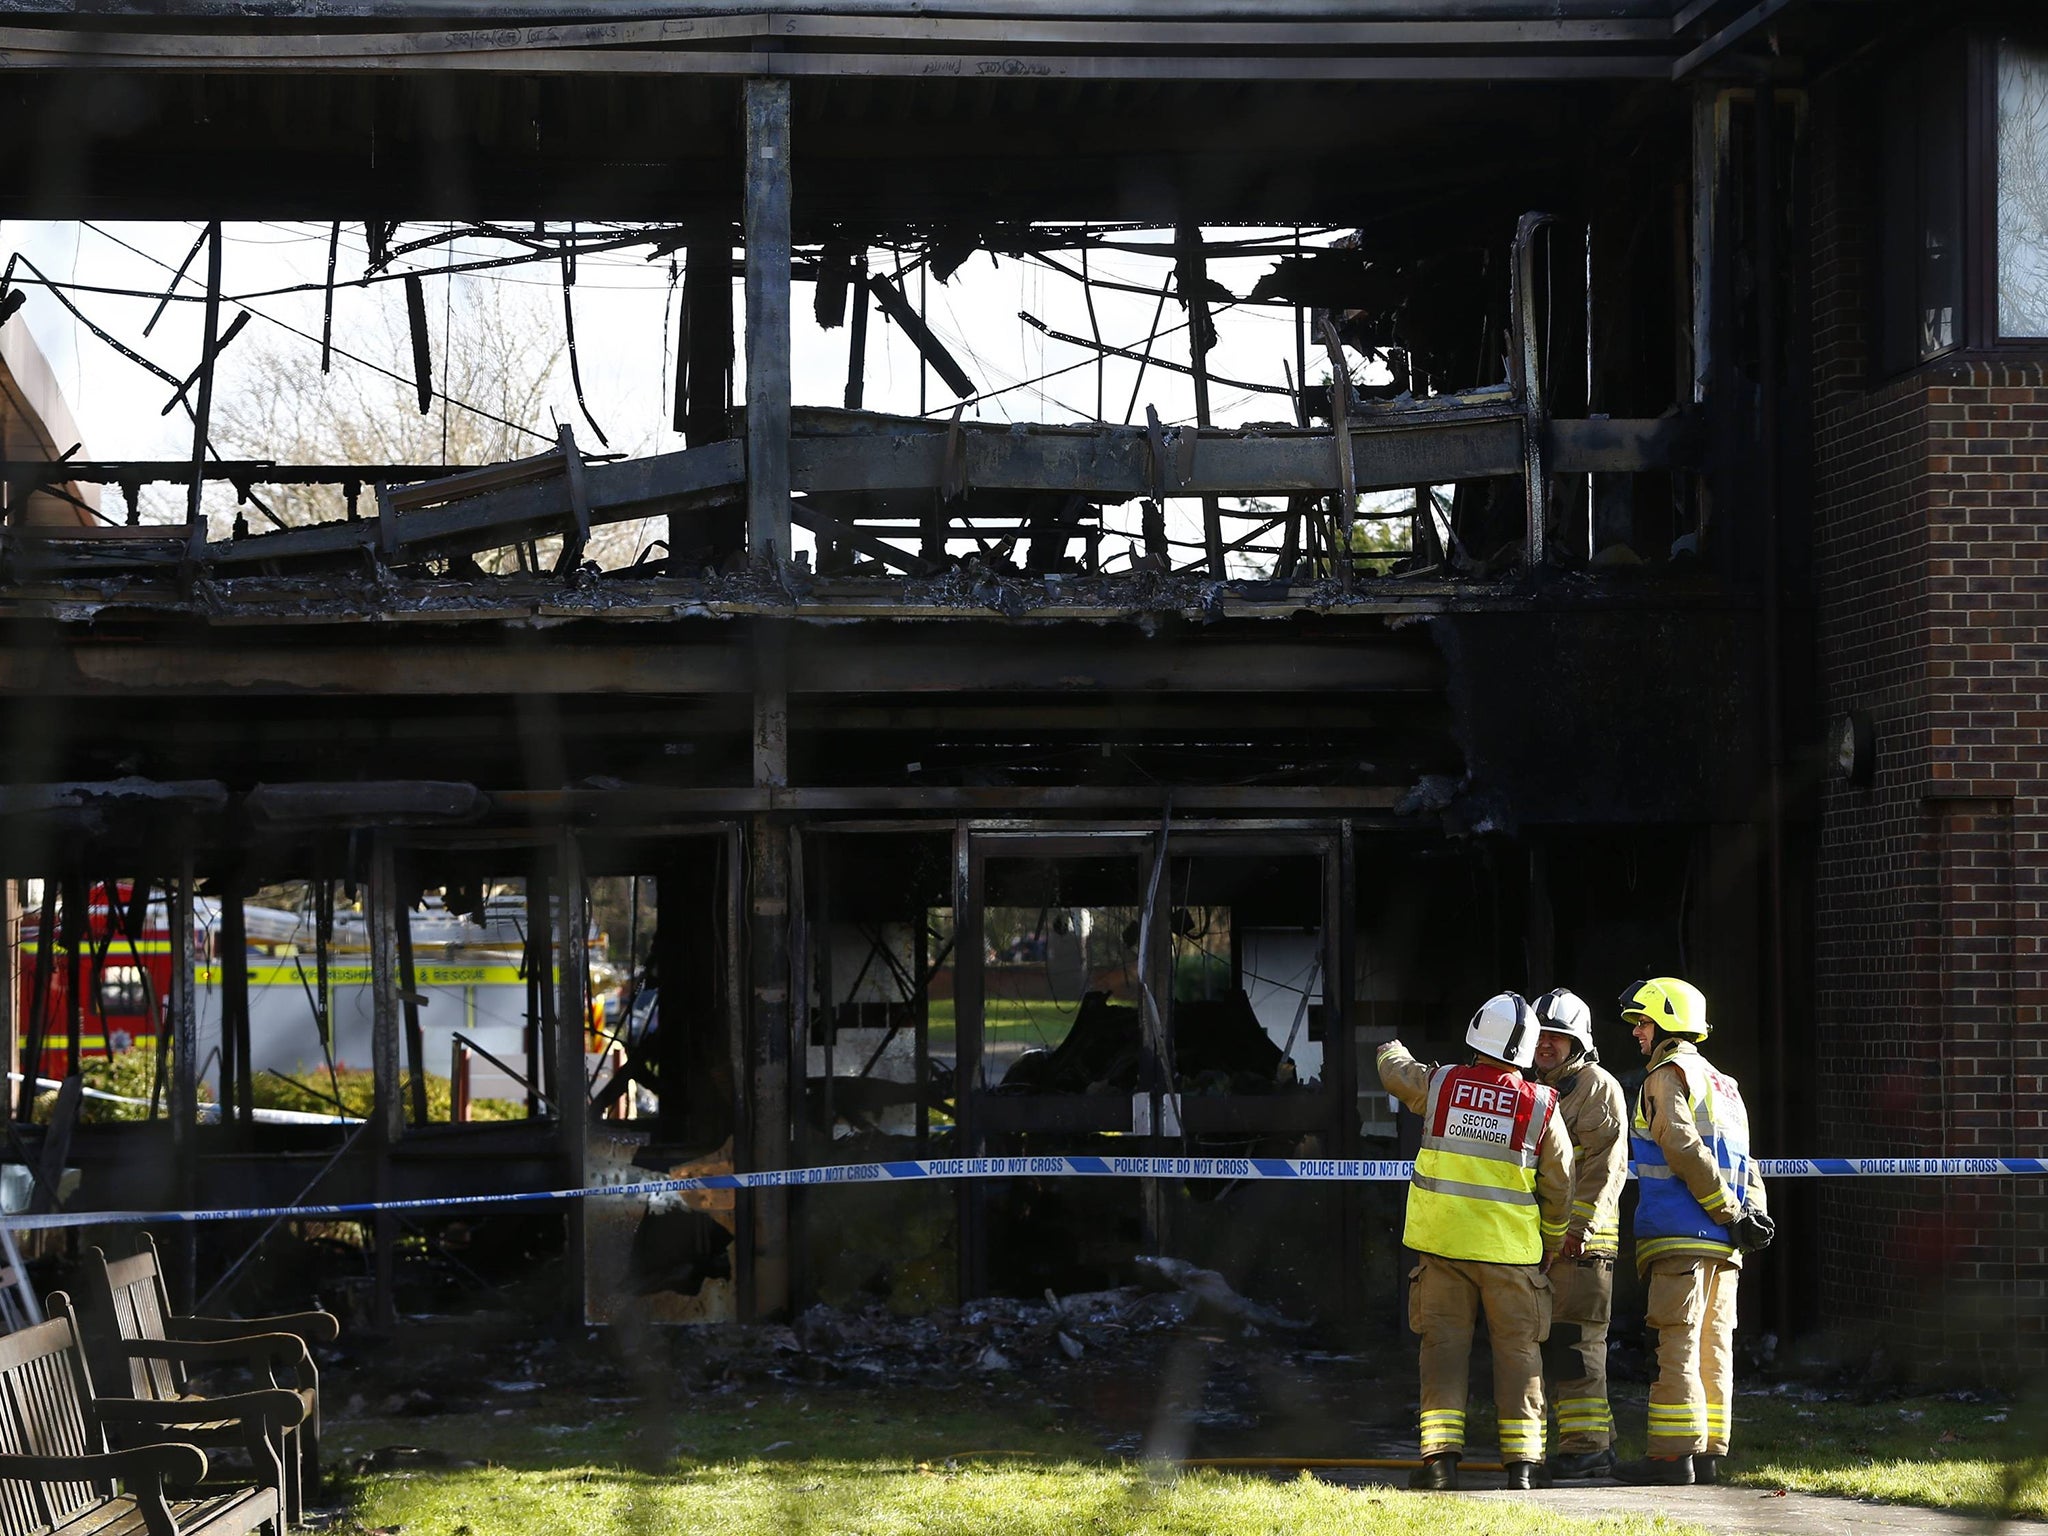 Firefighters assess the damage at the scene of the firebombing at the South Oxfordshire
District Council building